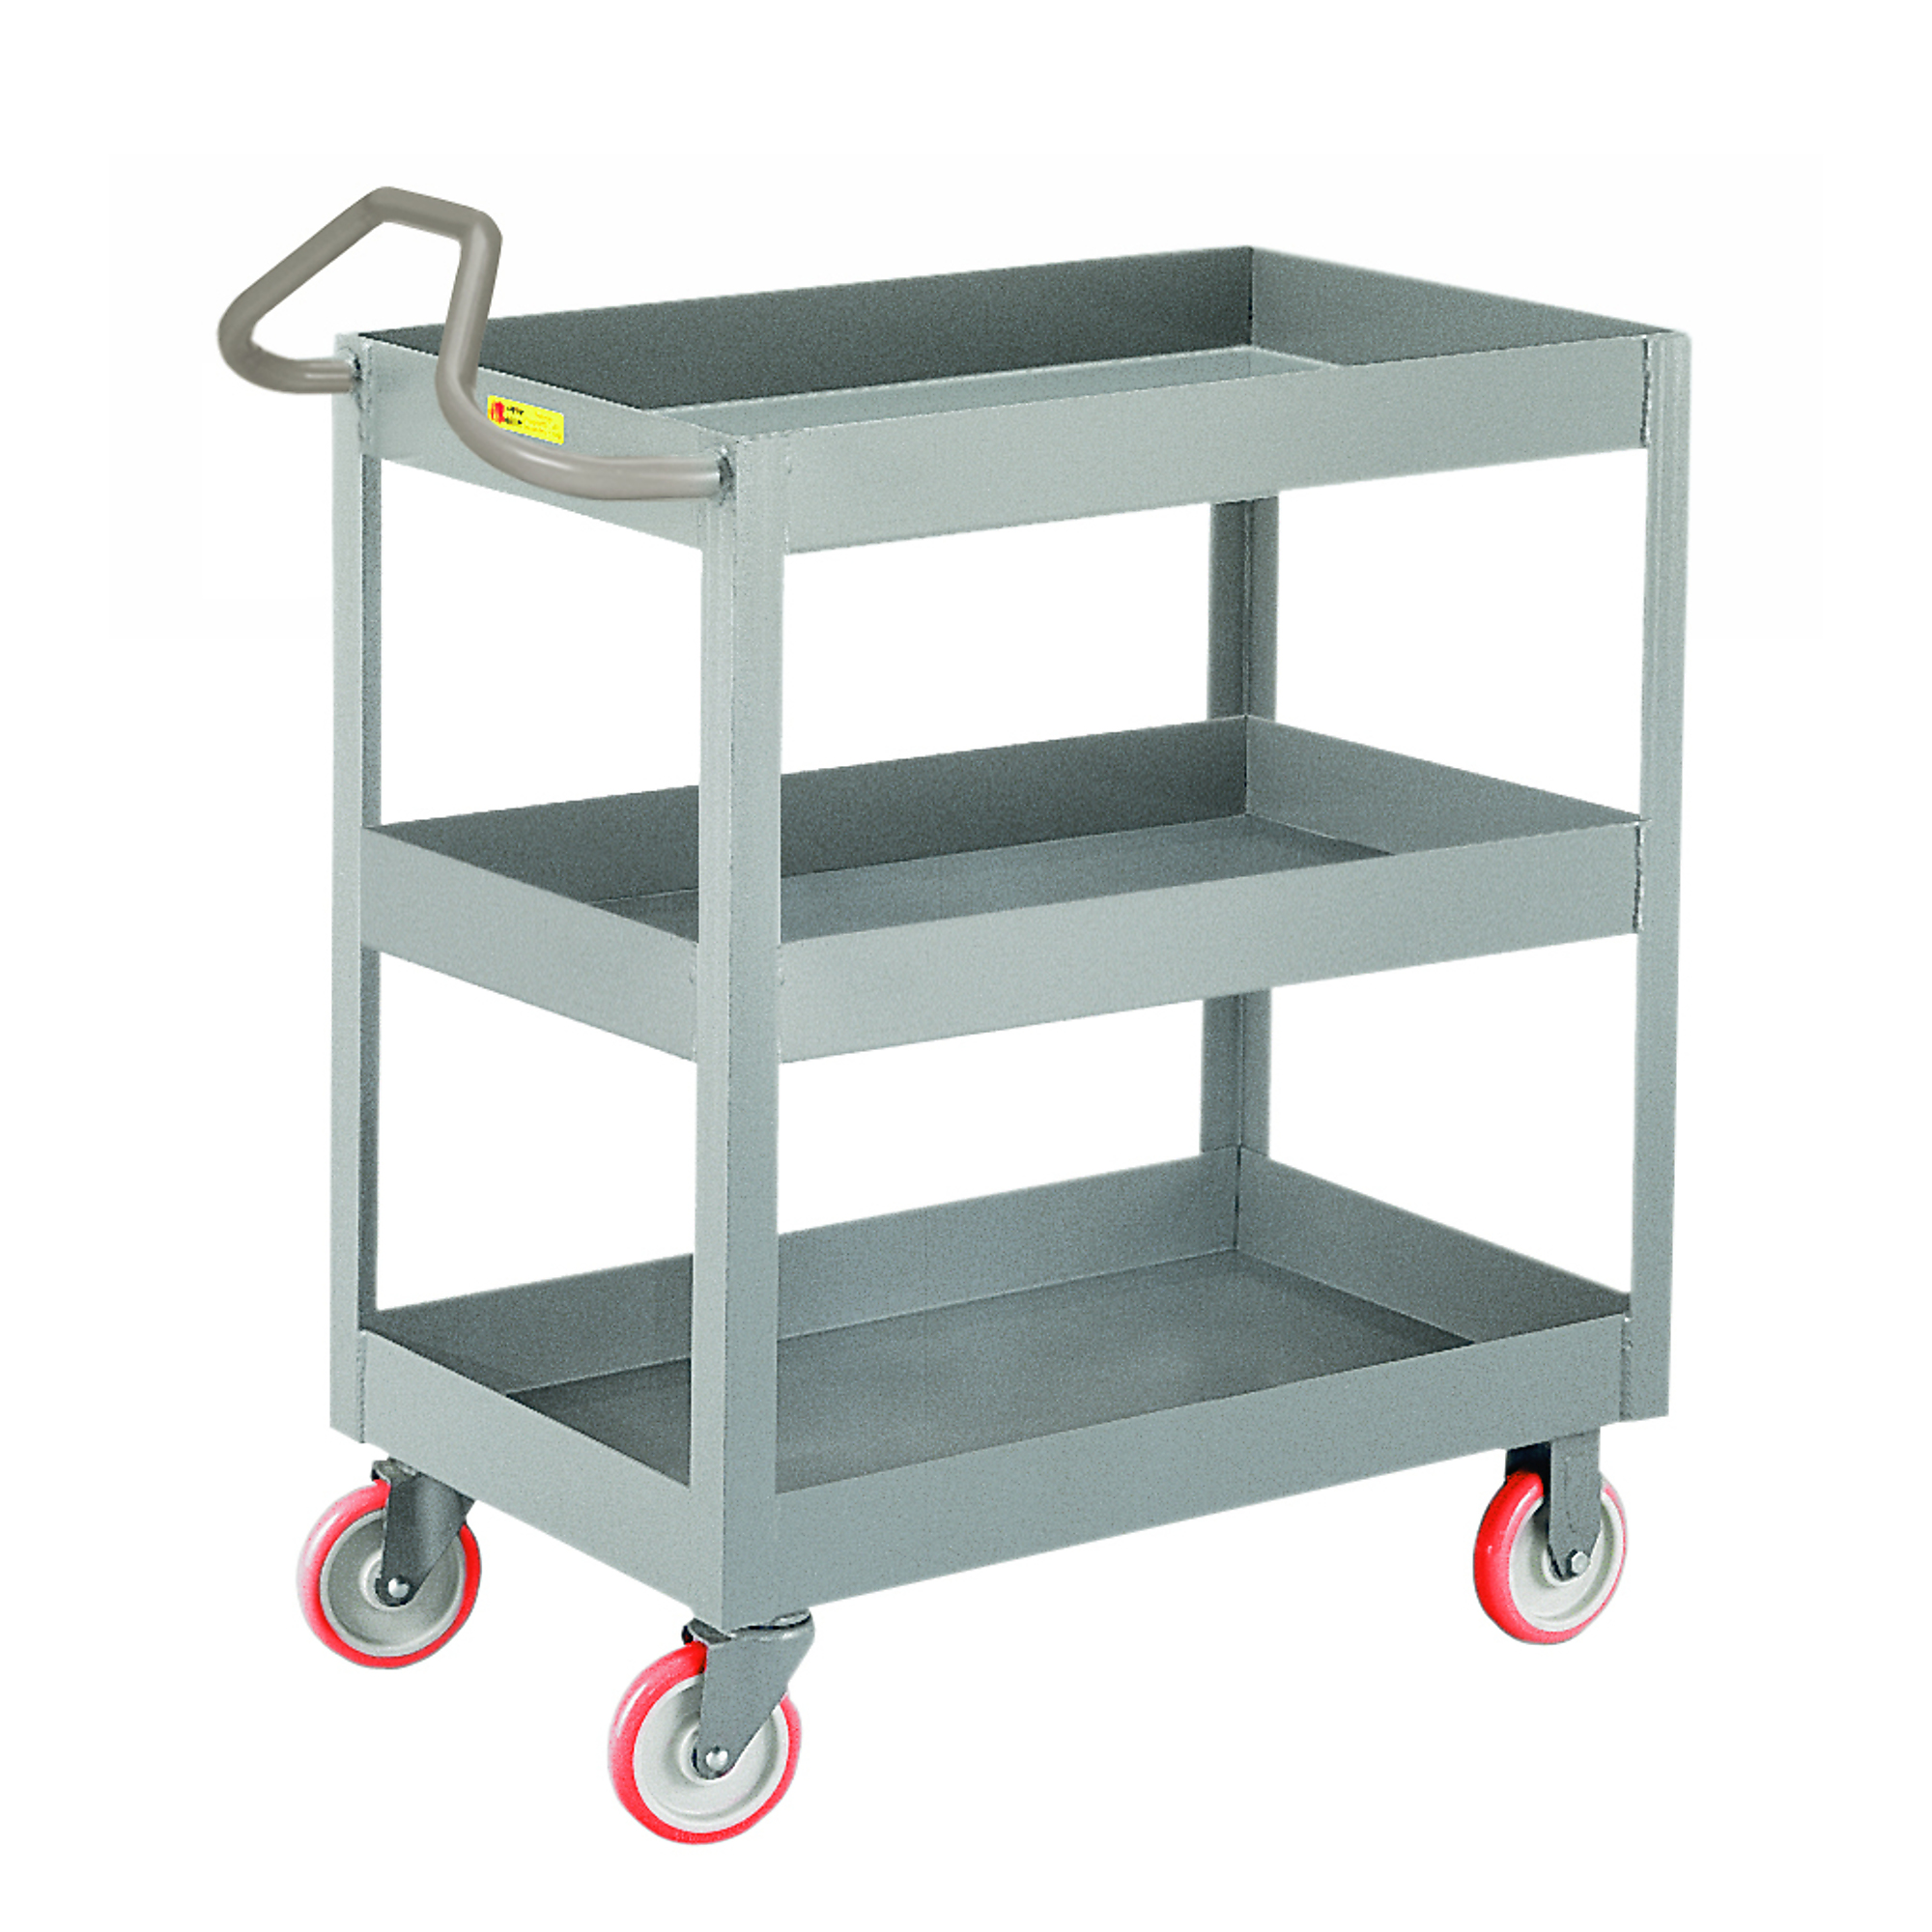 Little Giant, 3Inch Deep Shelf Truck, Ergo Handle, 24x36, 1200 lbs, Total Capacity 1200 lb, Shelves (qty.) 3, Material Carbon Steel, Model 3ENDS2436X3